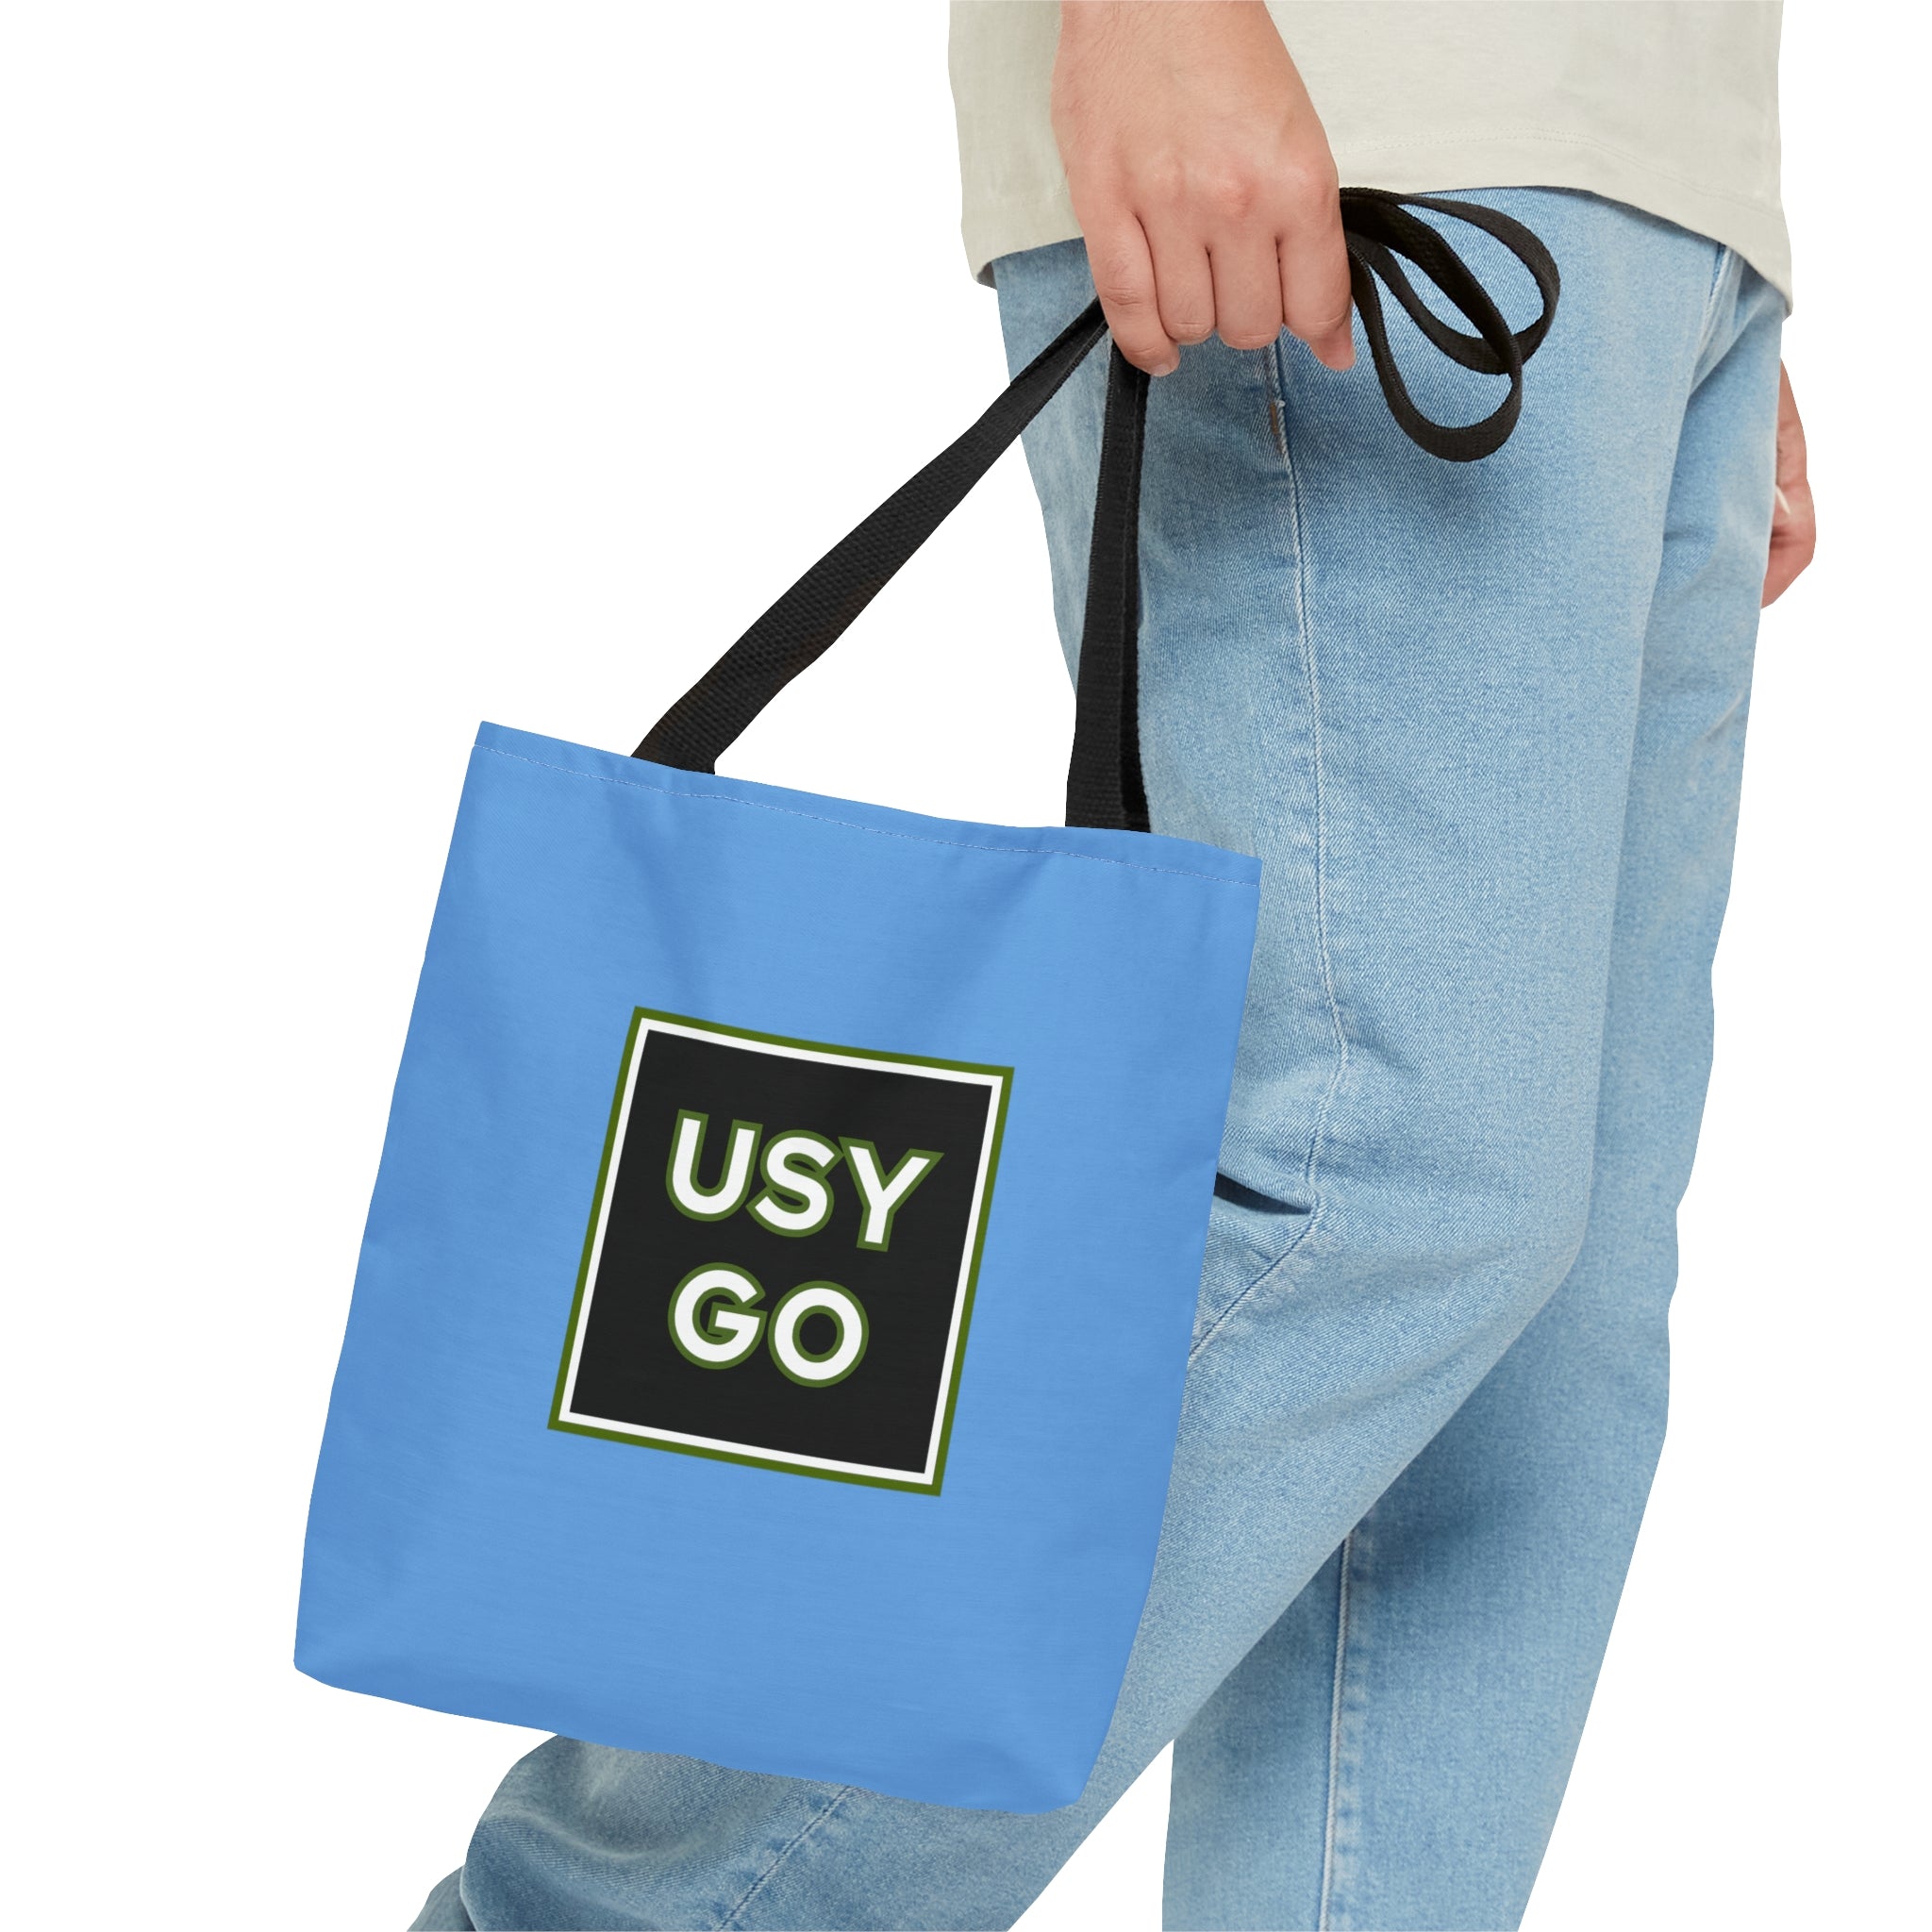 Light Blue USYGO Tote Bags in 3 Sizes